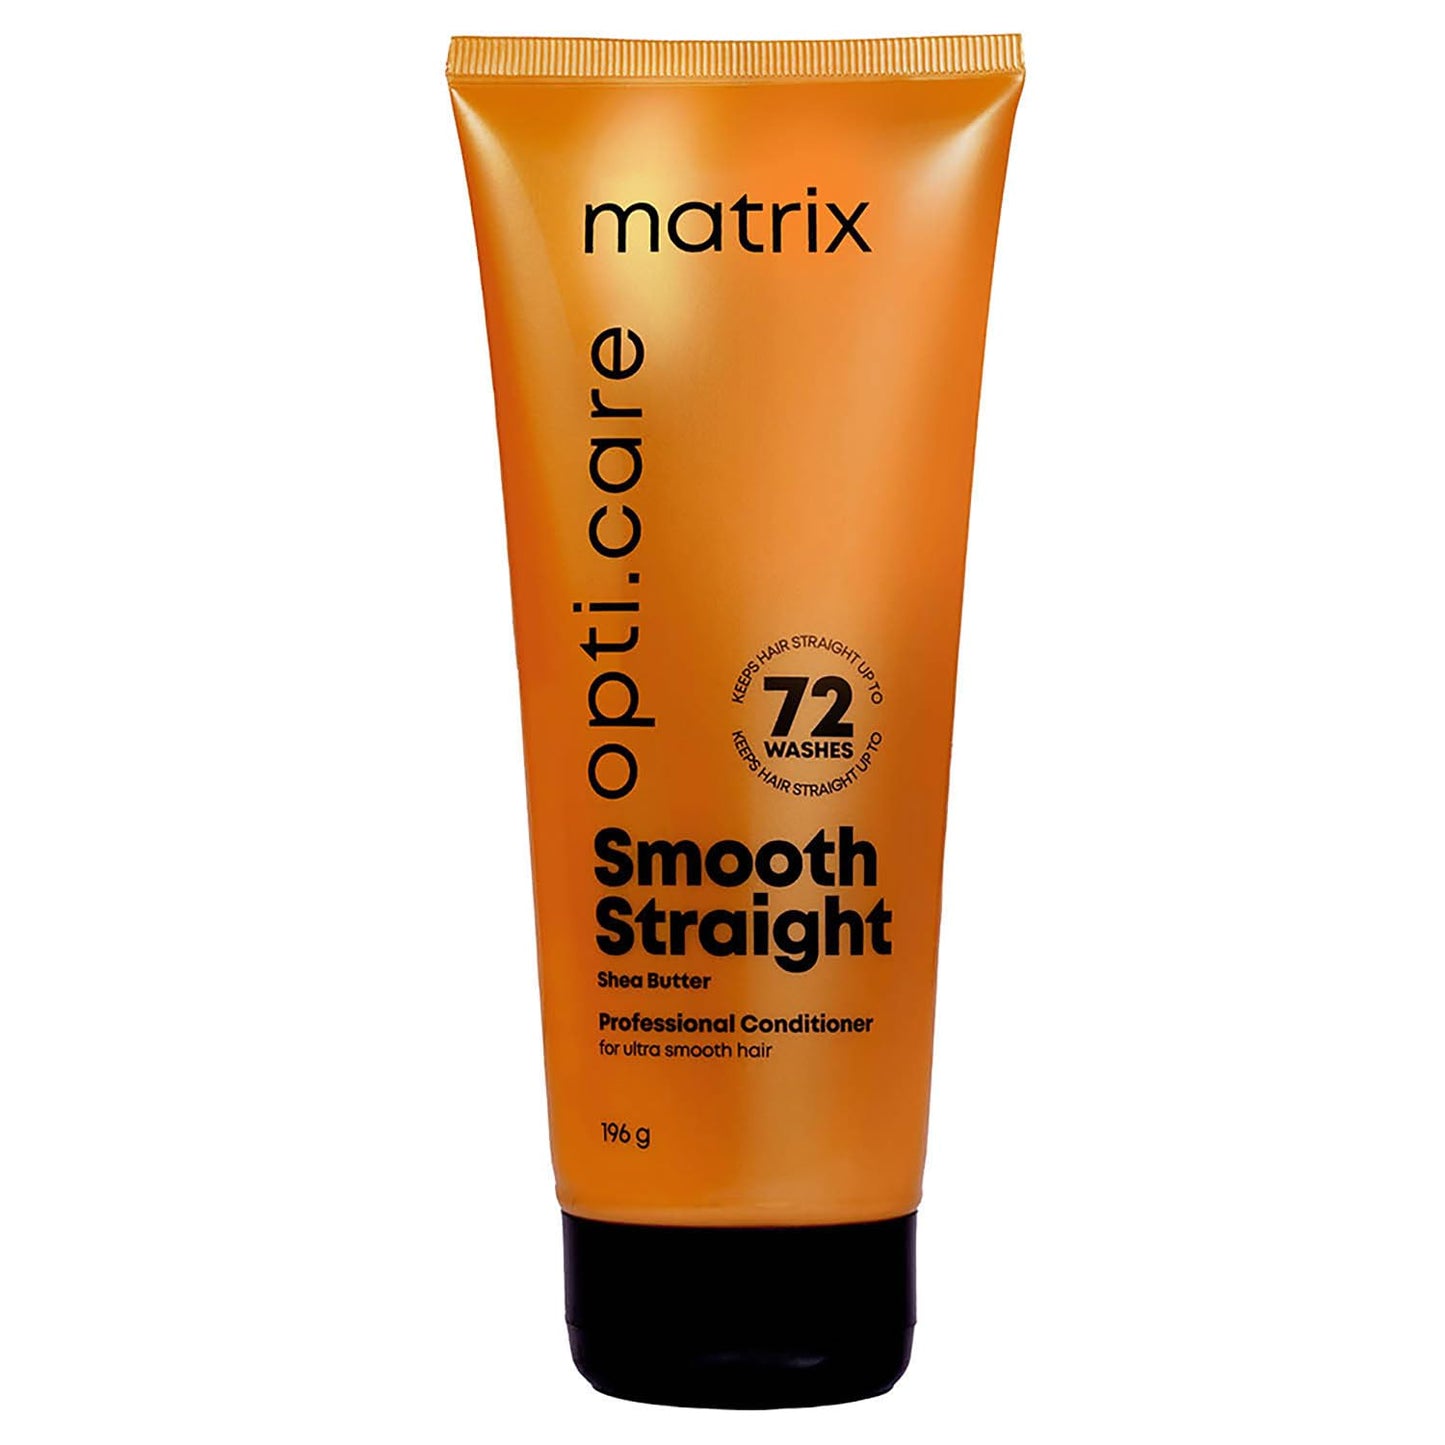 Matrix Opti.Care Smoothing Conditioner Shea Butter 196g